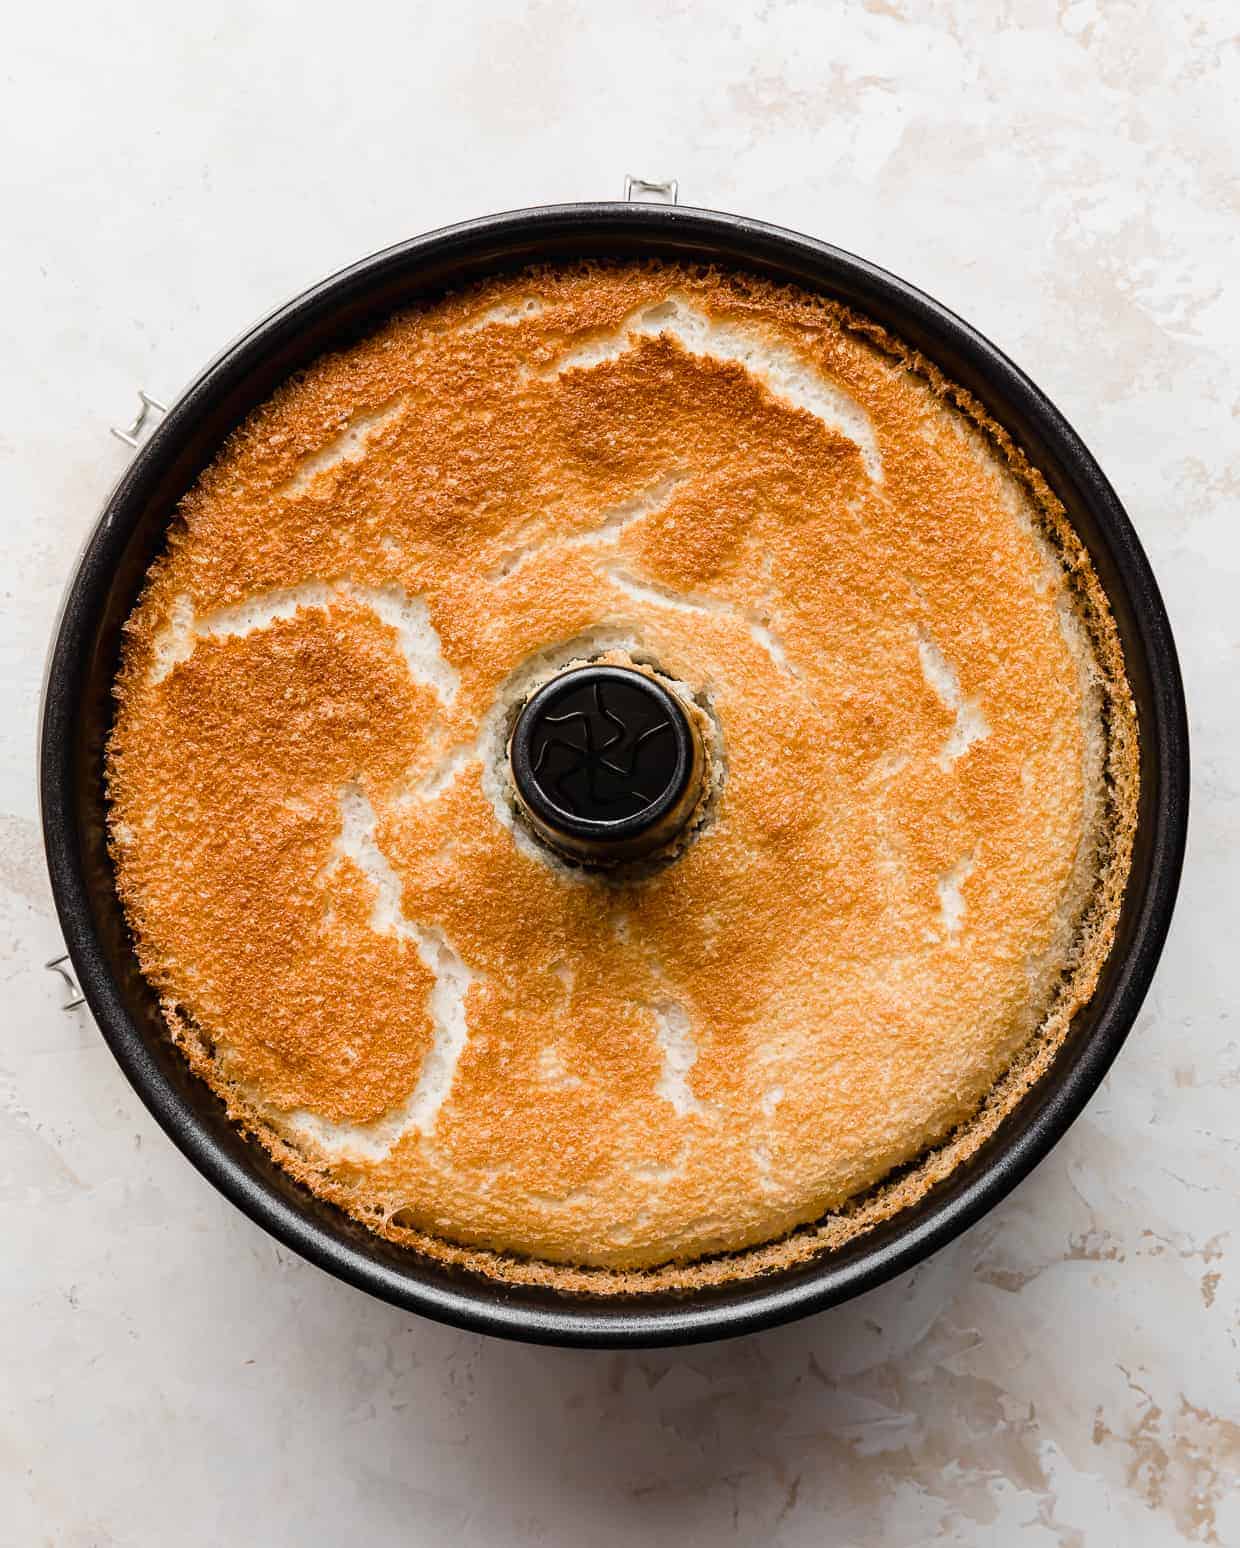 A golden brown baked Angel food cake in a tube pan.